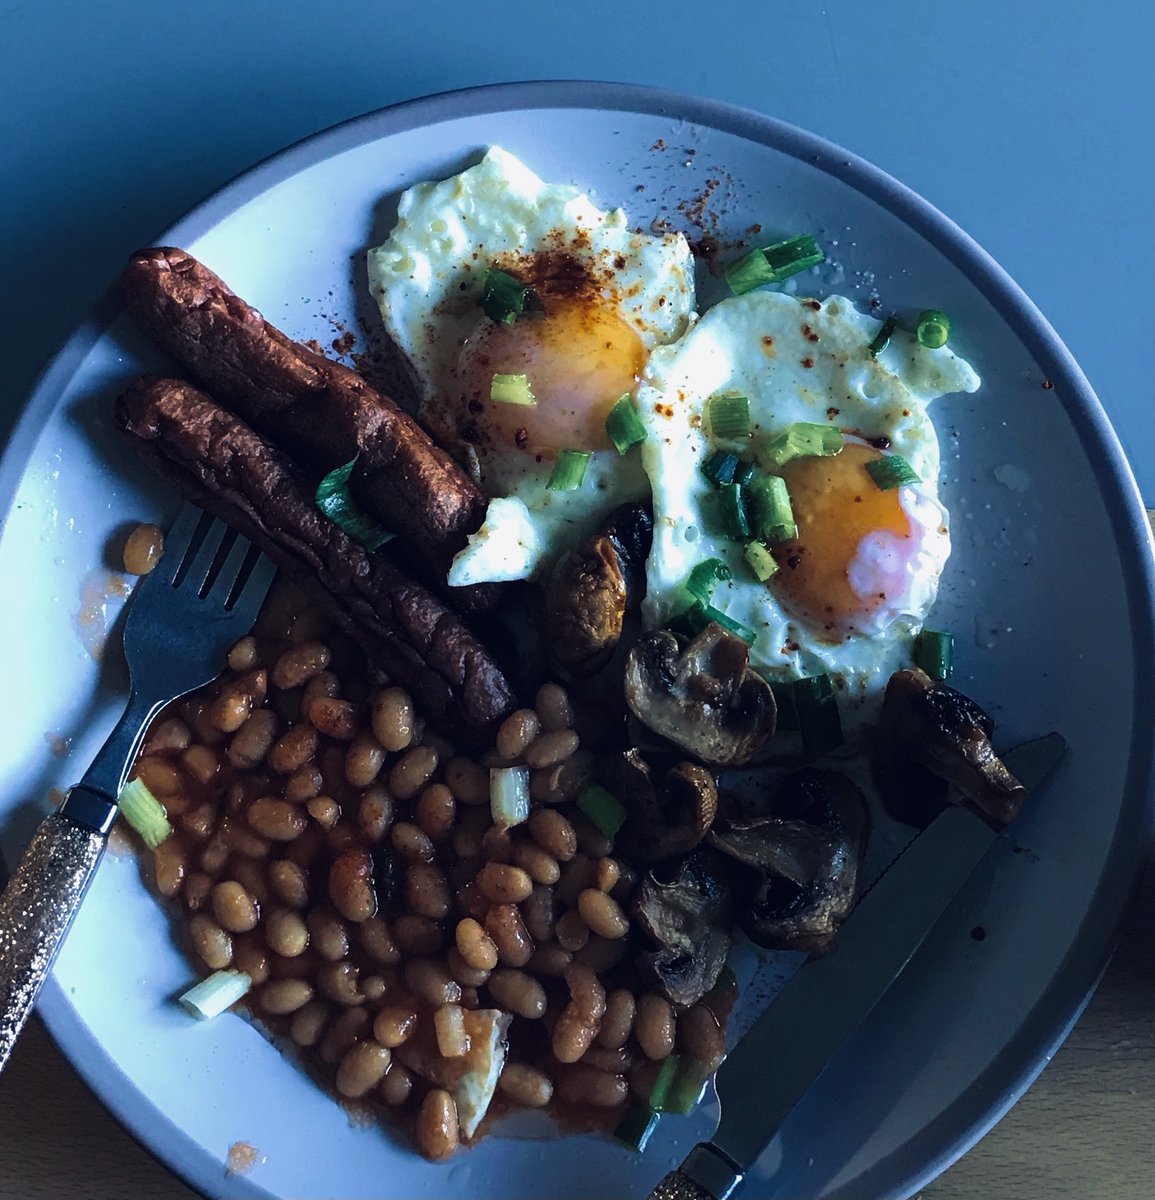 "After I cycle back home, I visualise 3 challenges I might encounter during the day whilst having my shower. I regularly perform this ritual and it really helps me to be mentally prepared for the highs and lows of the day. That, plus a hearty breakfast help to keep me going."